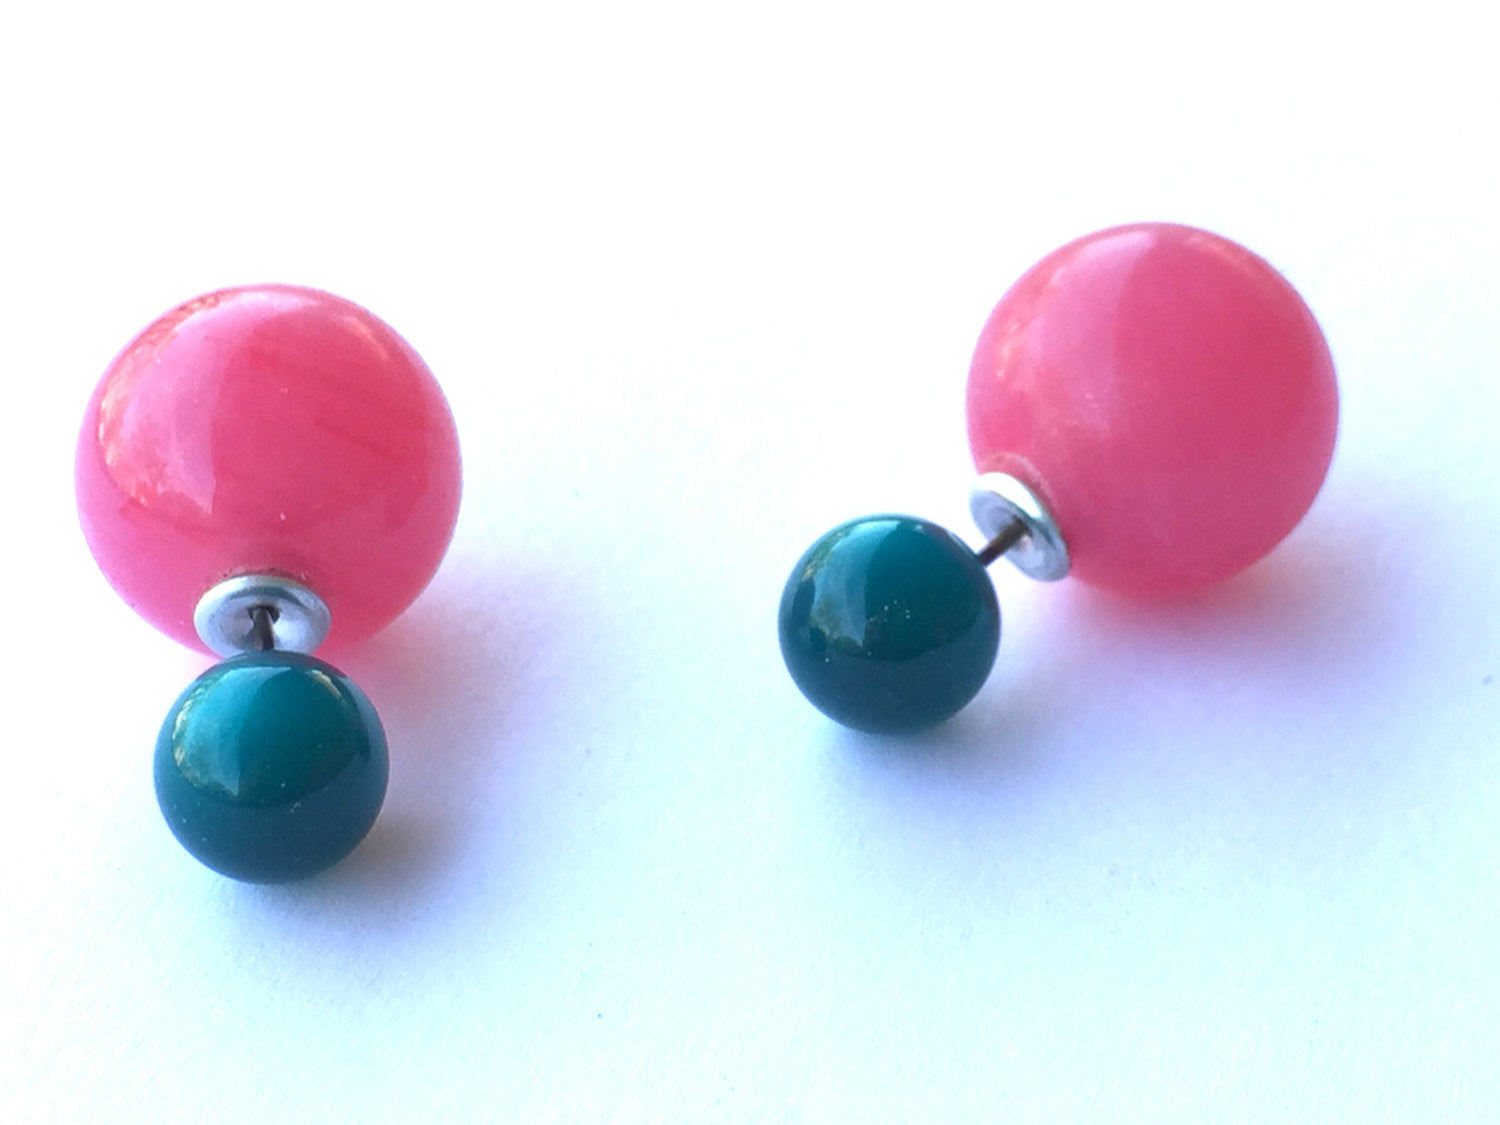 Deep Teal Green with Fuchsia Pink 2 Sided Stud Earrings